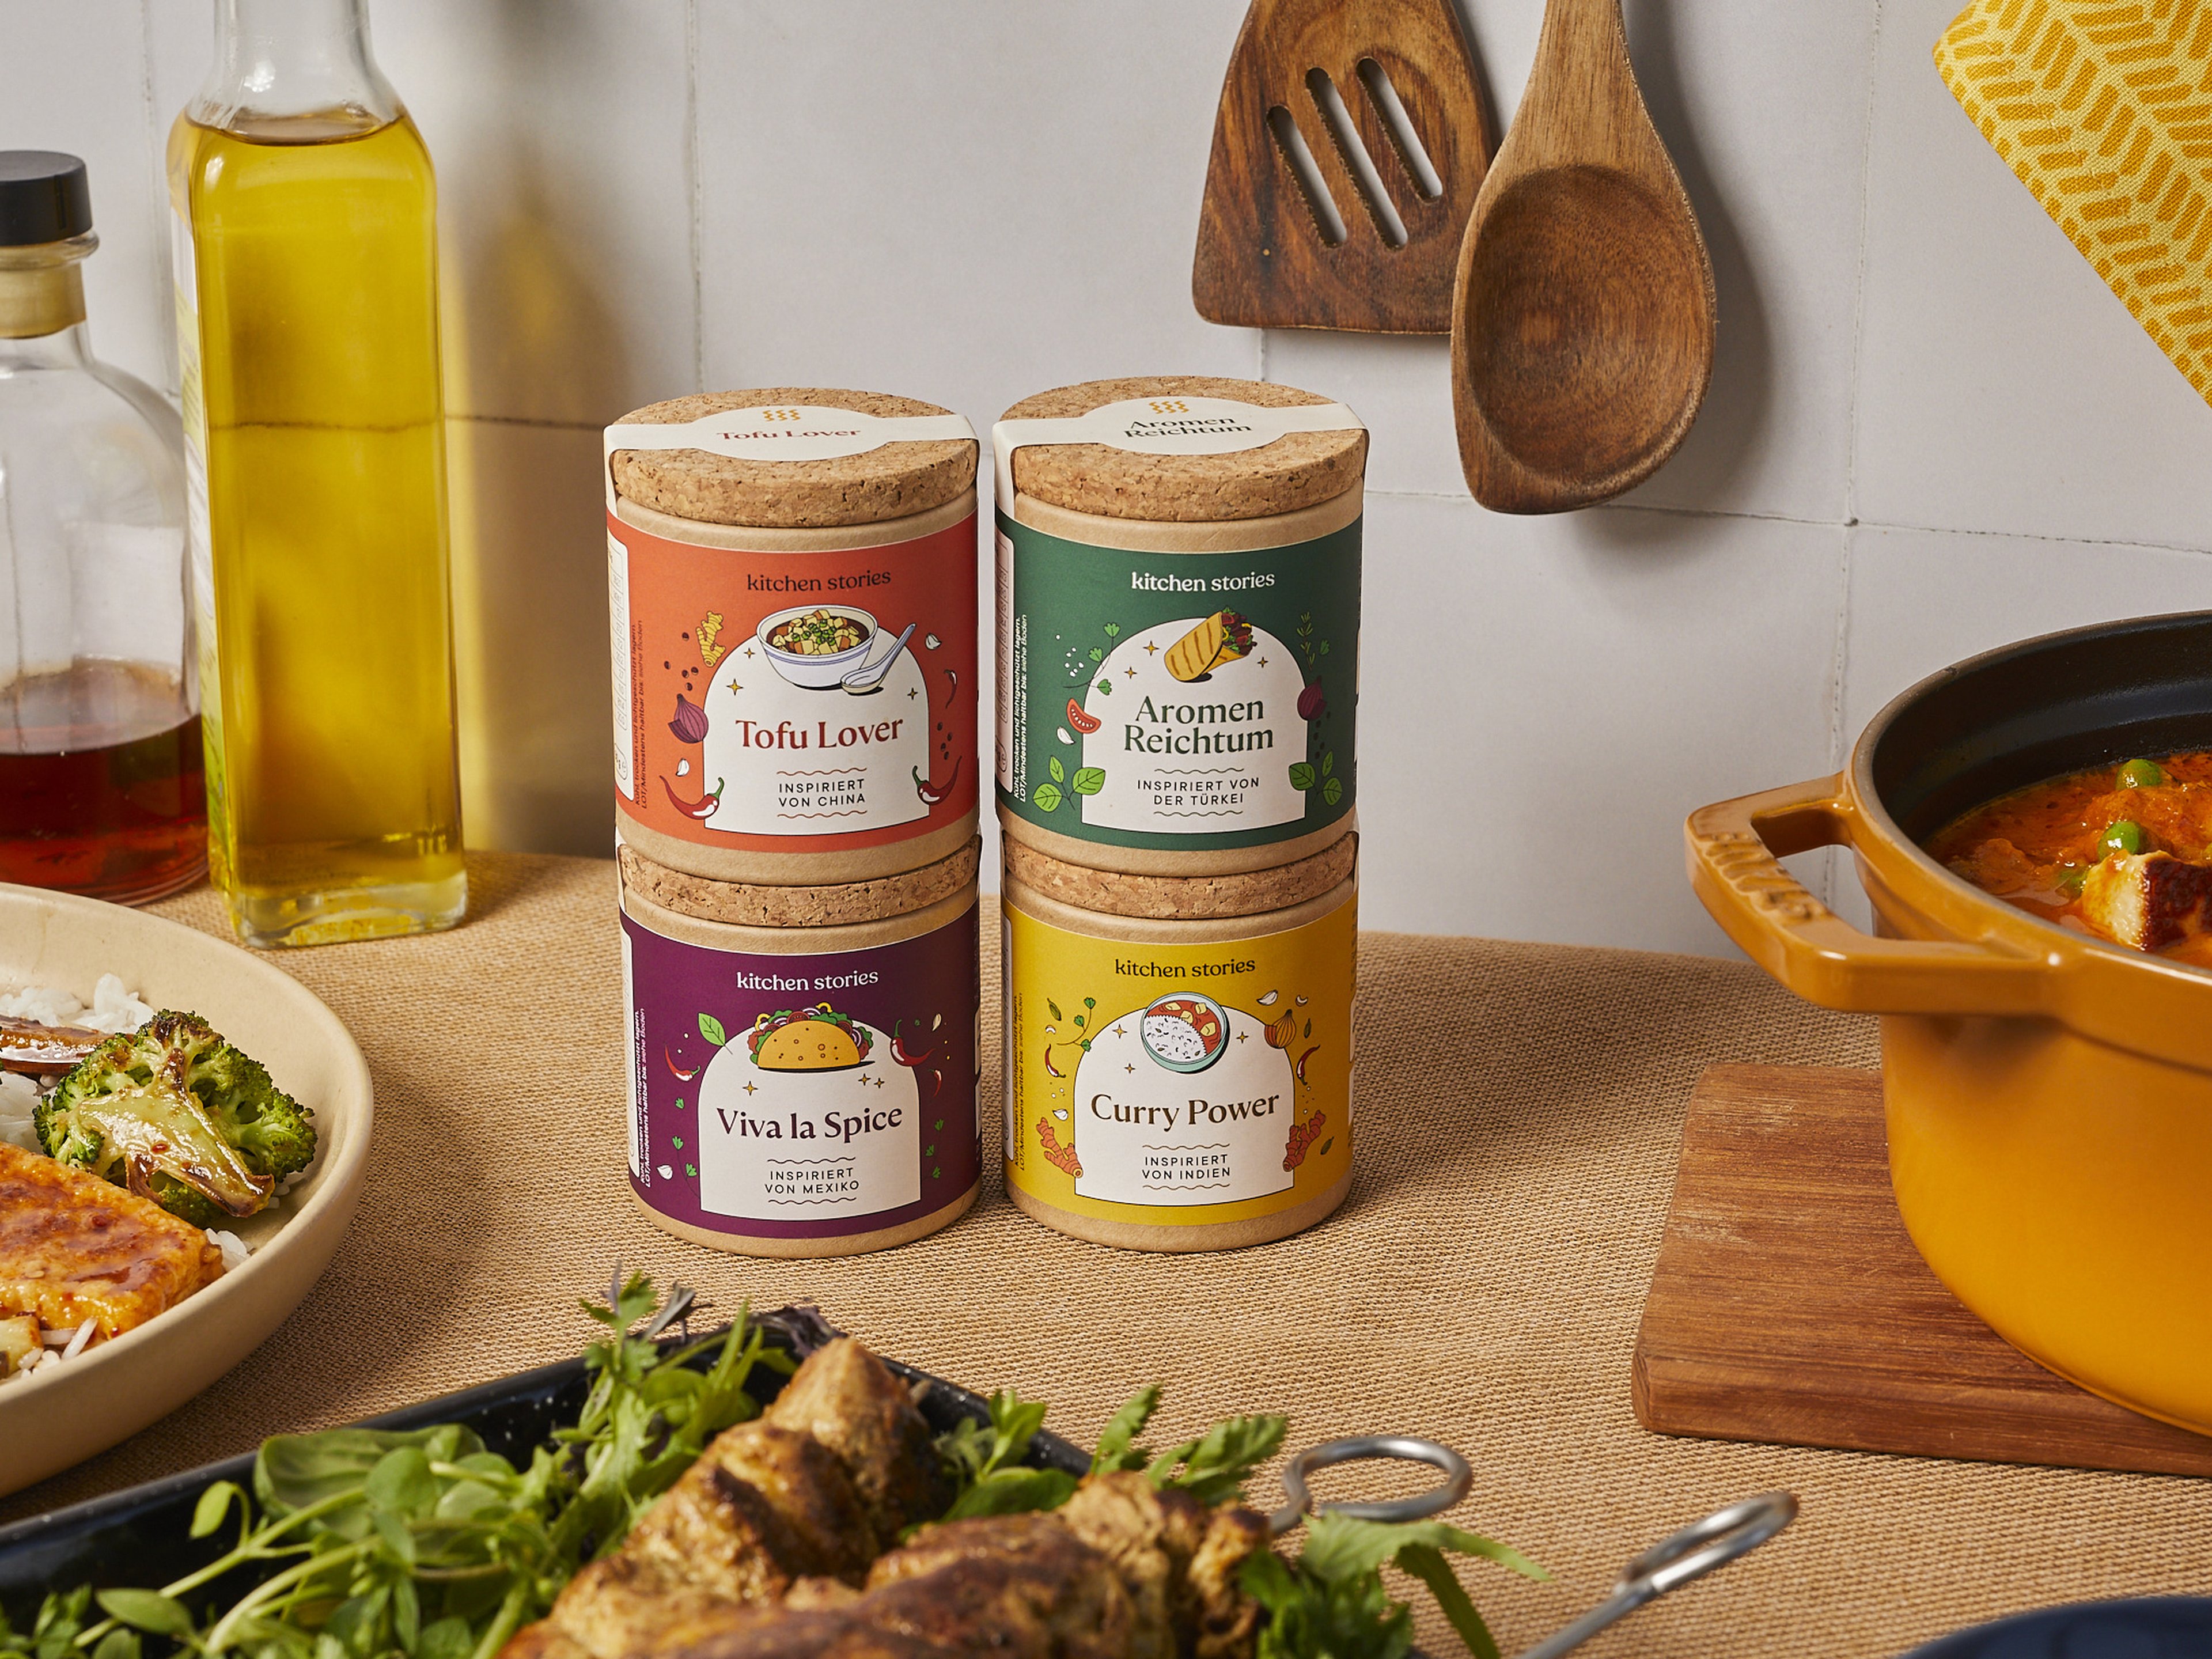 NEW: Our Seasoning Blends Take Everyday Cooking to Another Level